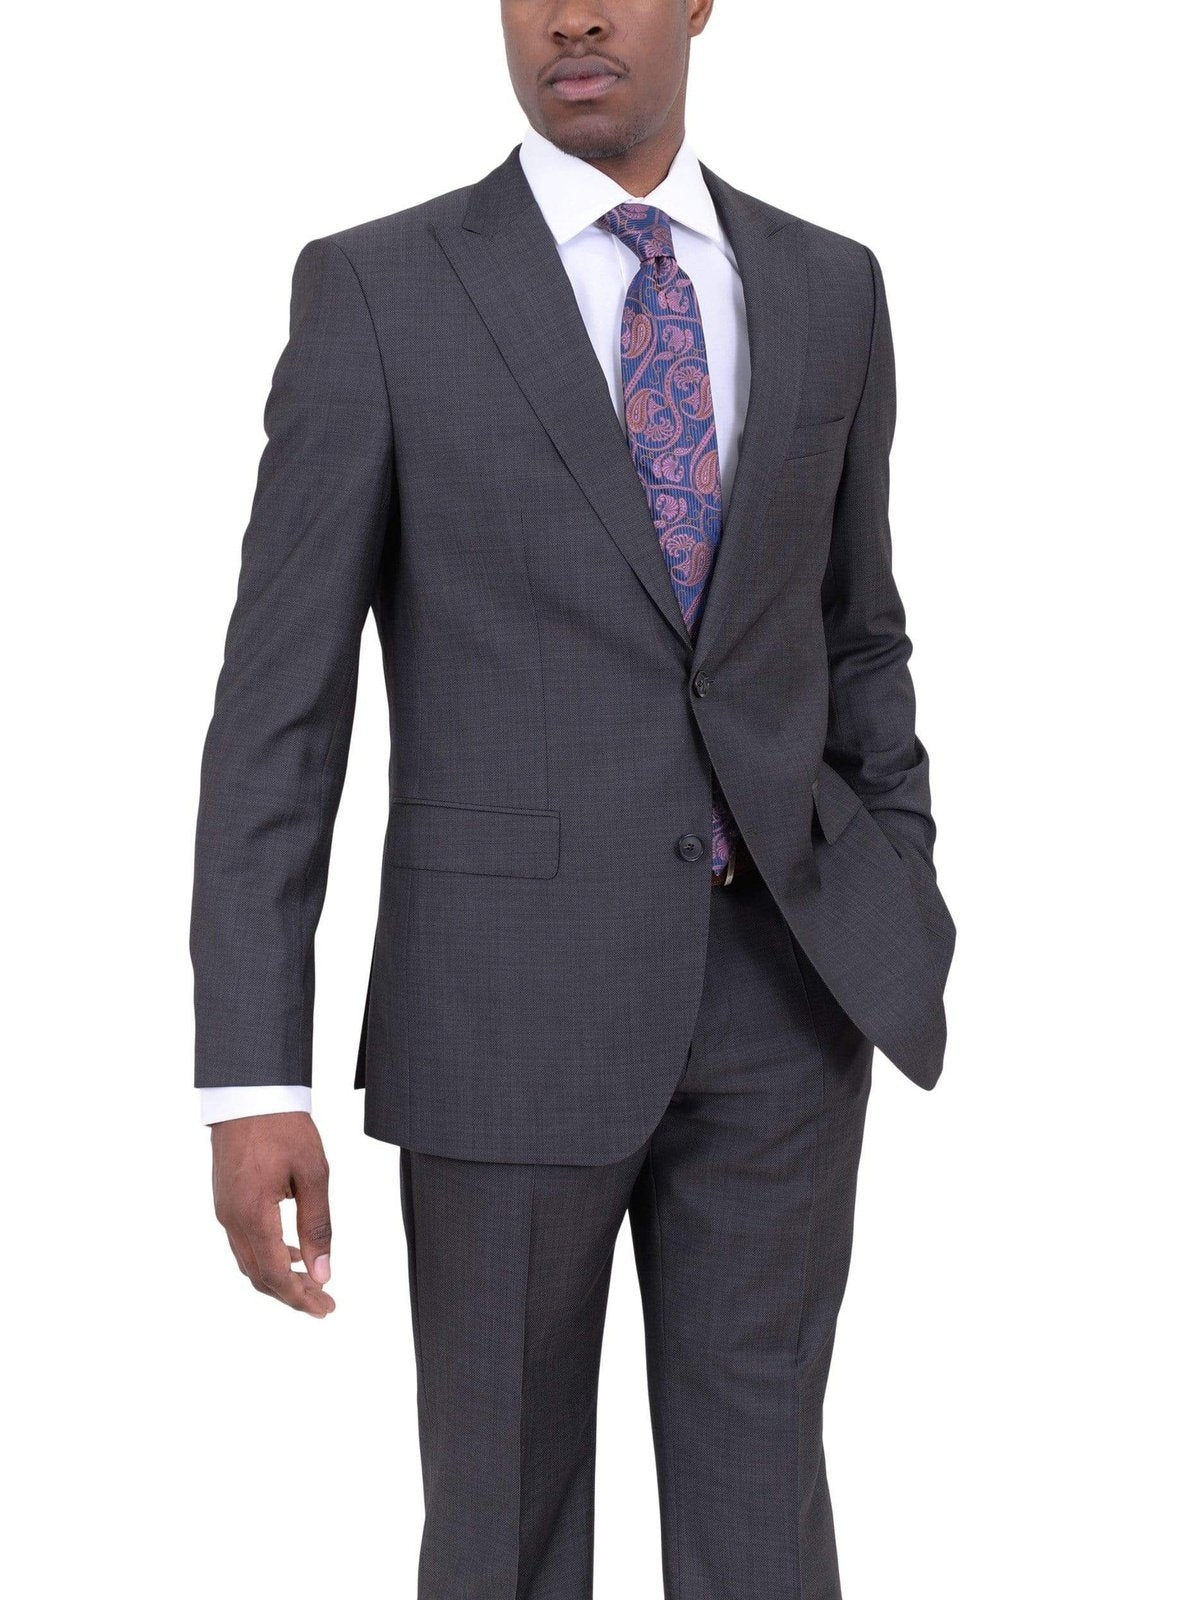 HUGO BOSS TWO PIECE SUITS 40L Hugo Boss The Fordham/central Charcoal Gray Pindot Wool Suit With Peak Lapels